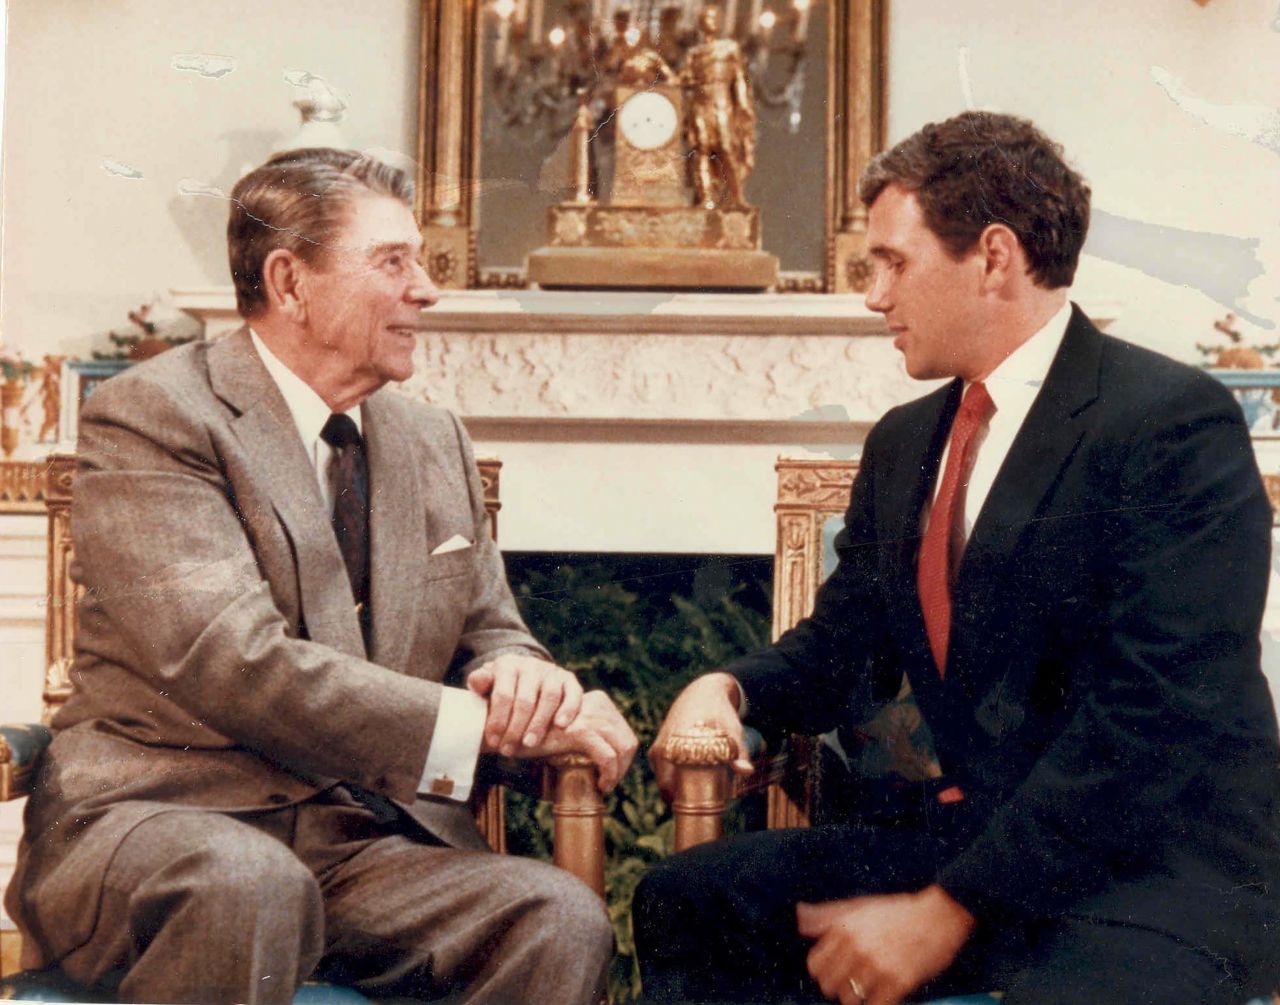 Pence meets with President Ronald Reagan while running for Congress in 1988. He lost that race and another one in 1990. After his second loss, Pence became president of the Indiana Policy Review Foundation, a conservative think tank. From 1993-1999, he hosted a syndicated talk radio show in which he described himself as Rush Limbaugh on decaf.